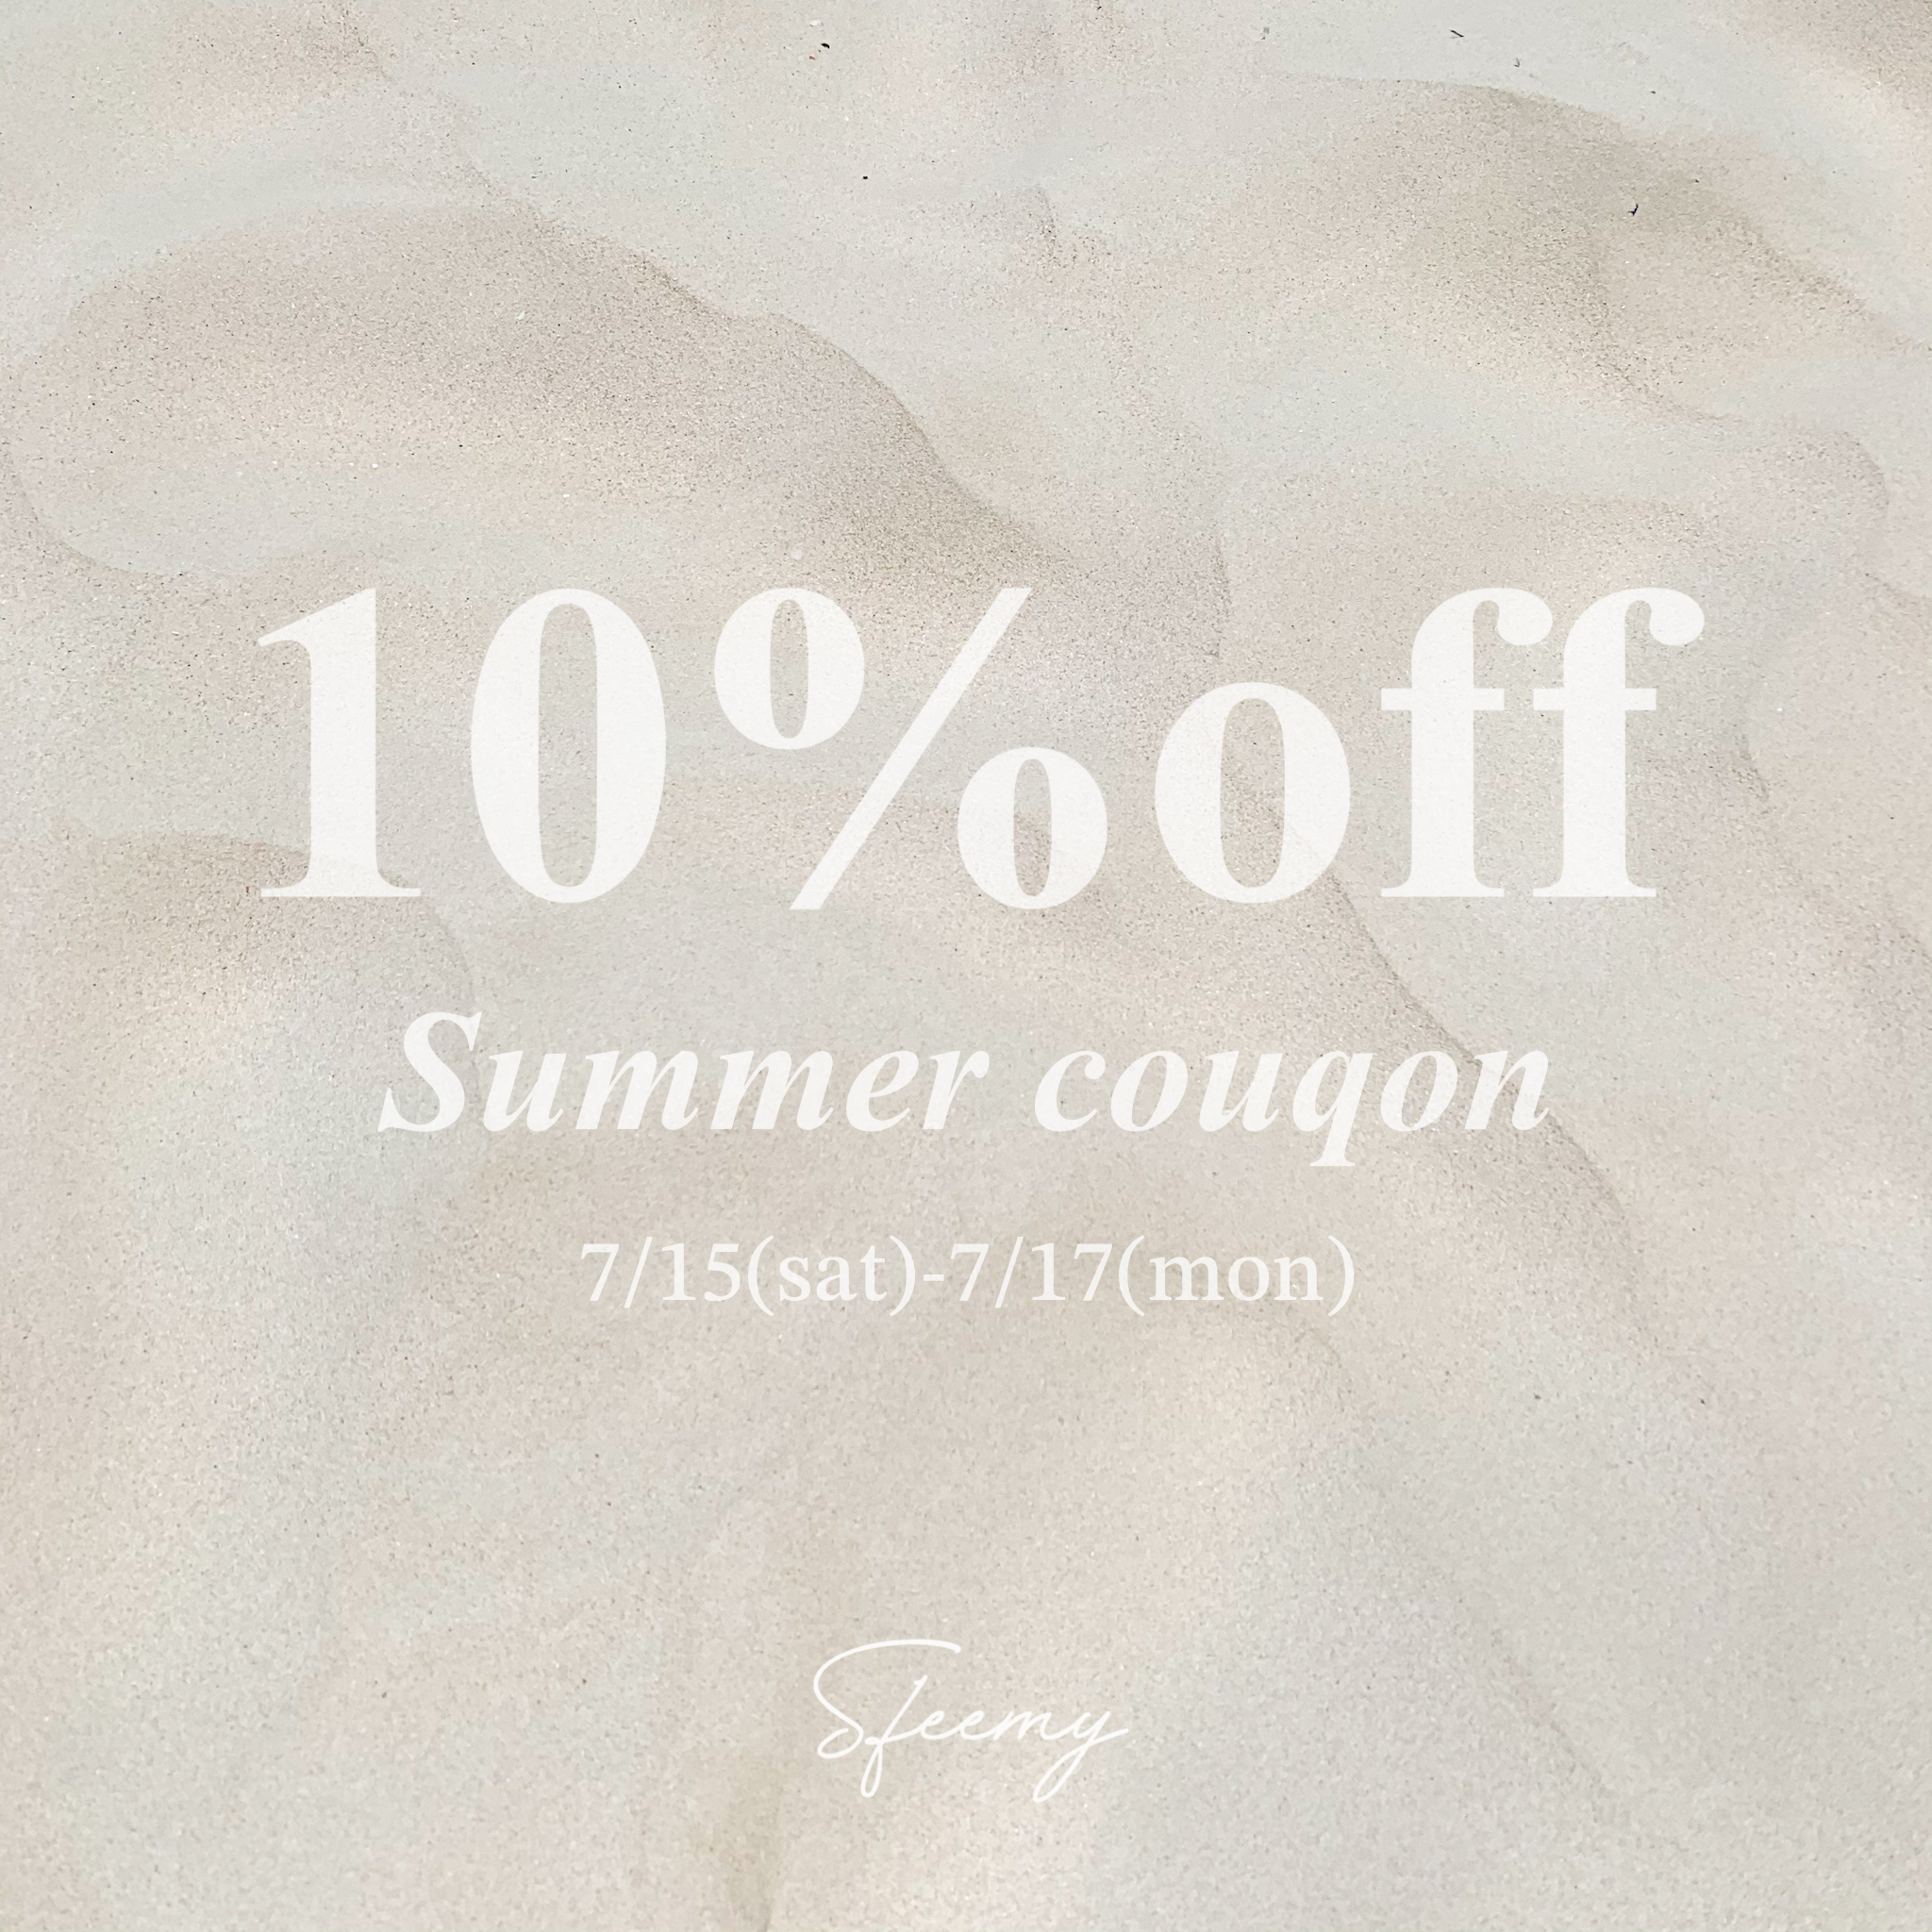 10%off Summer coupon